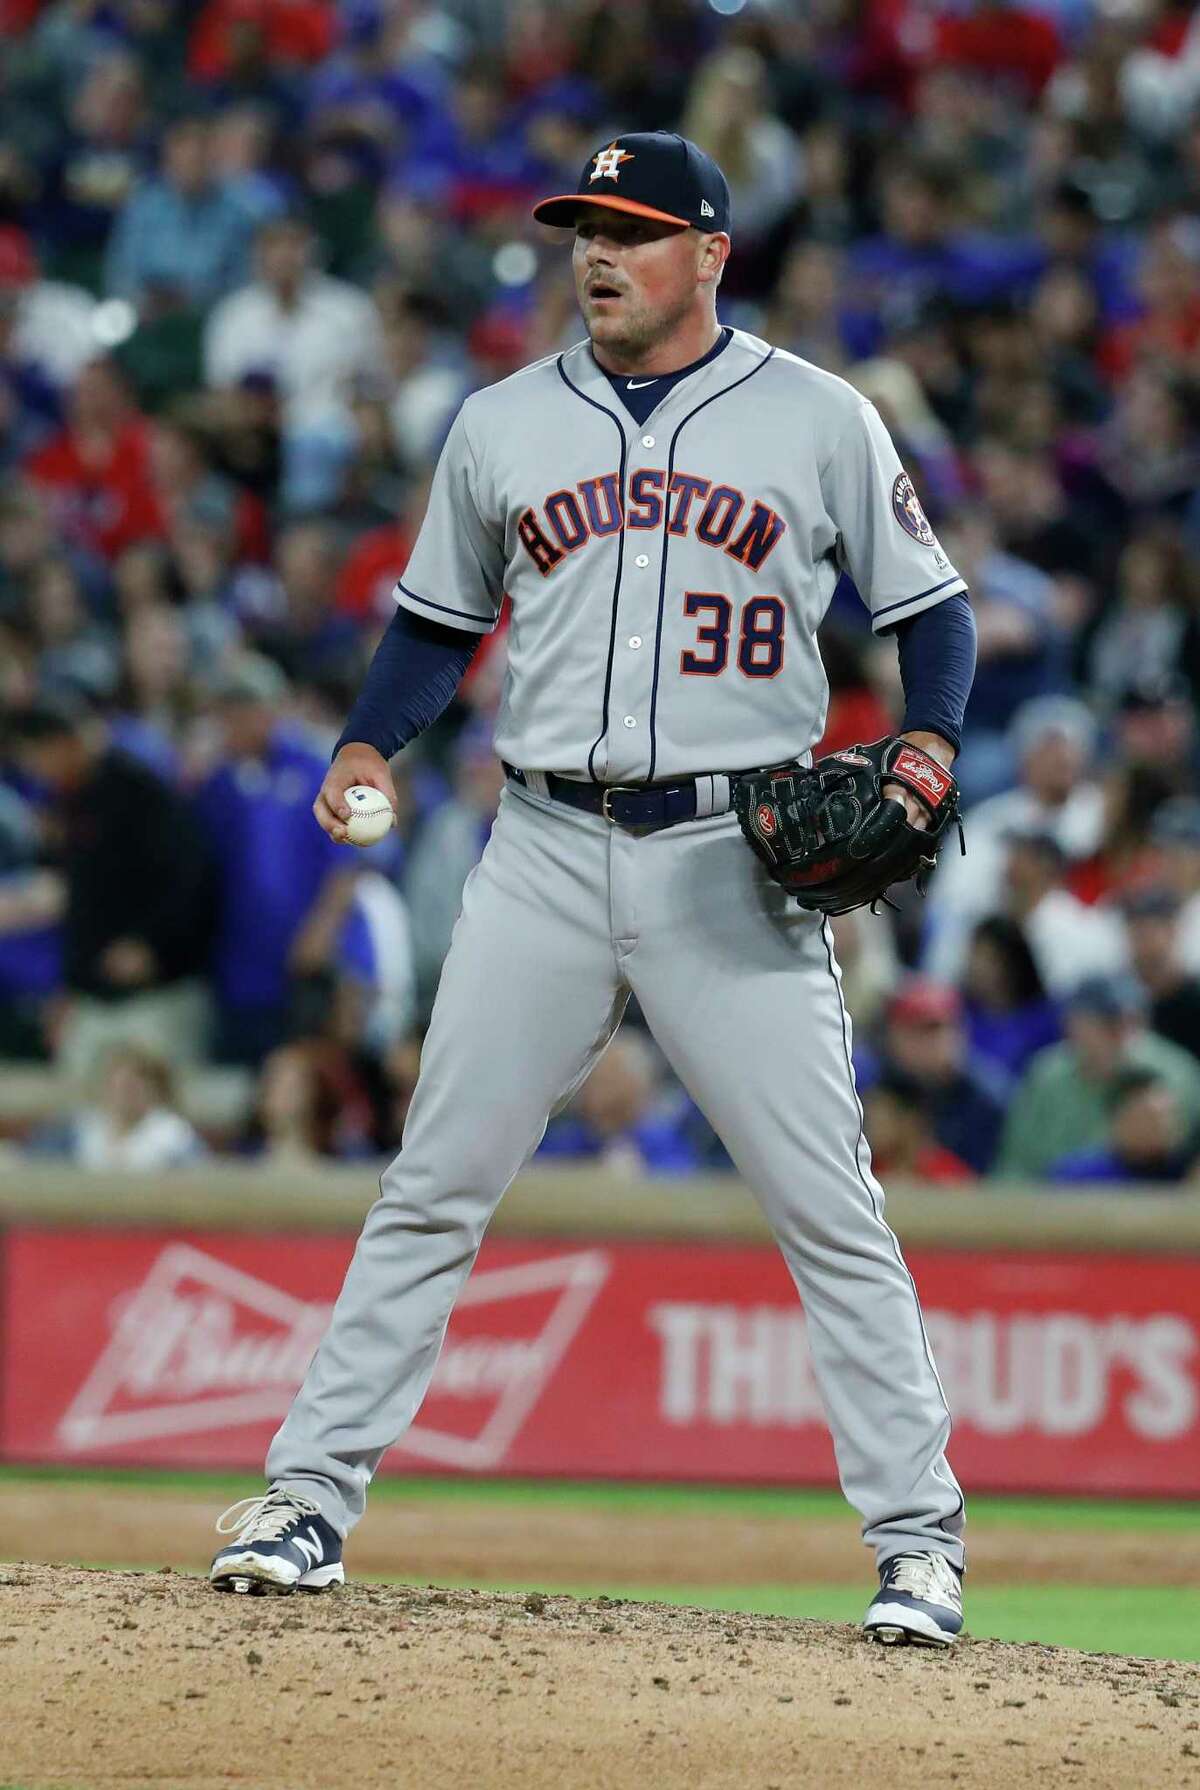 Houston Astros relief pitcher Joe Smith pitches in the seventh inning of an MLB baseball game Globe Life Park, Friday, March 30, 2018, in Arlington.